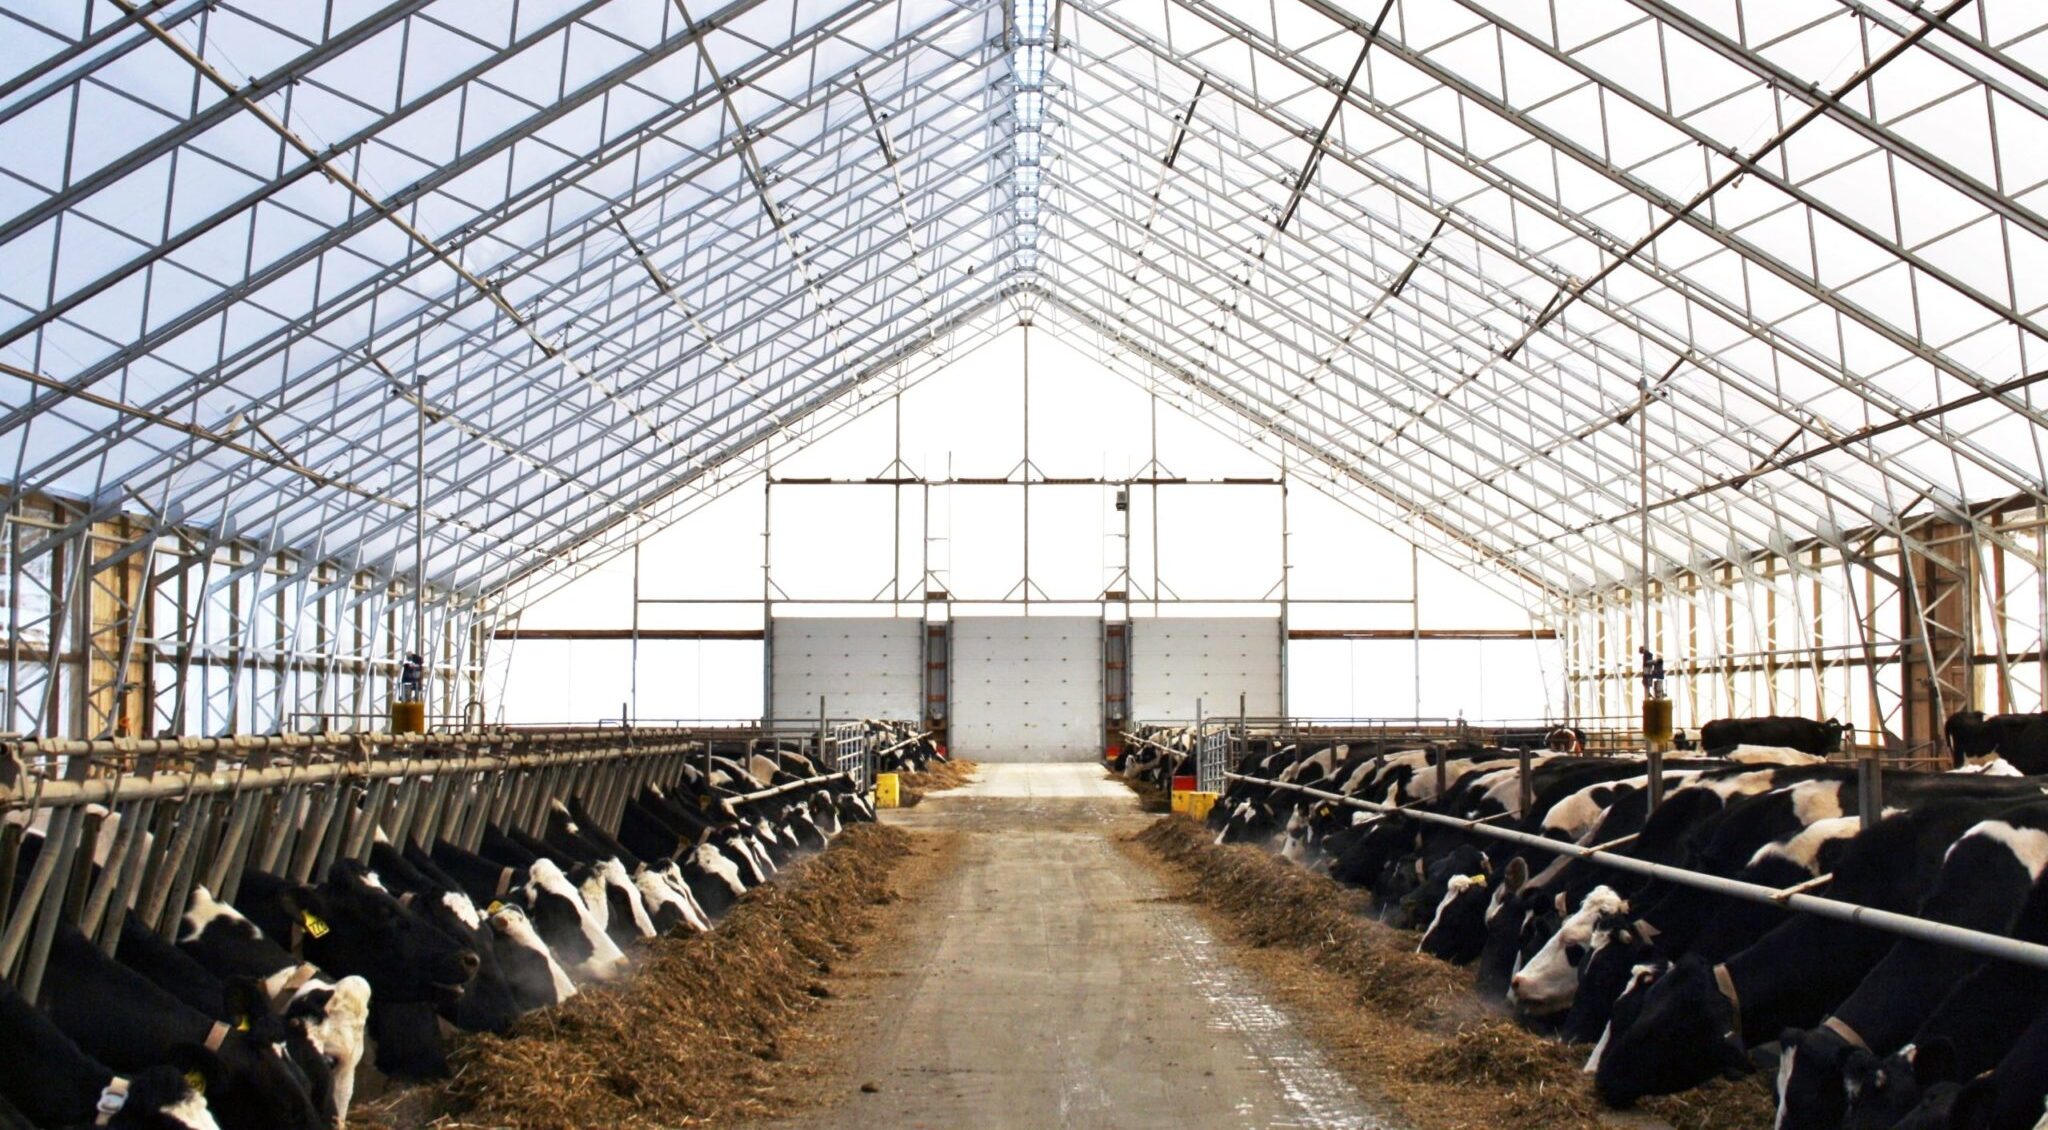 The Many Benefits of Fabric Structures for Livestock Housing